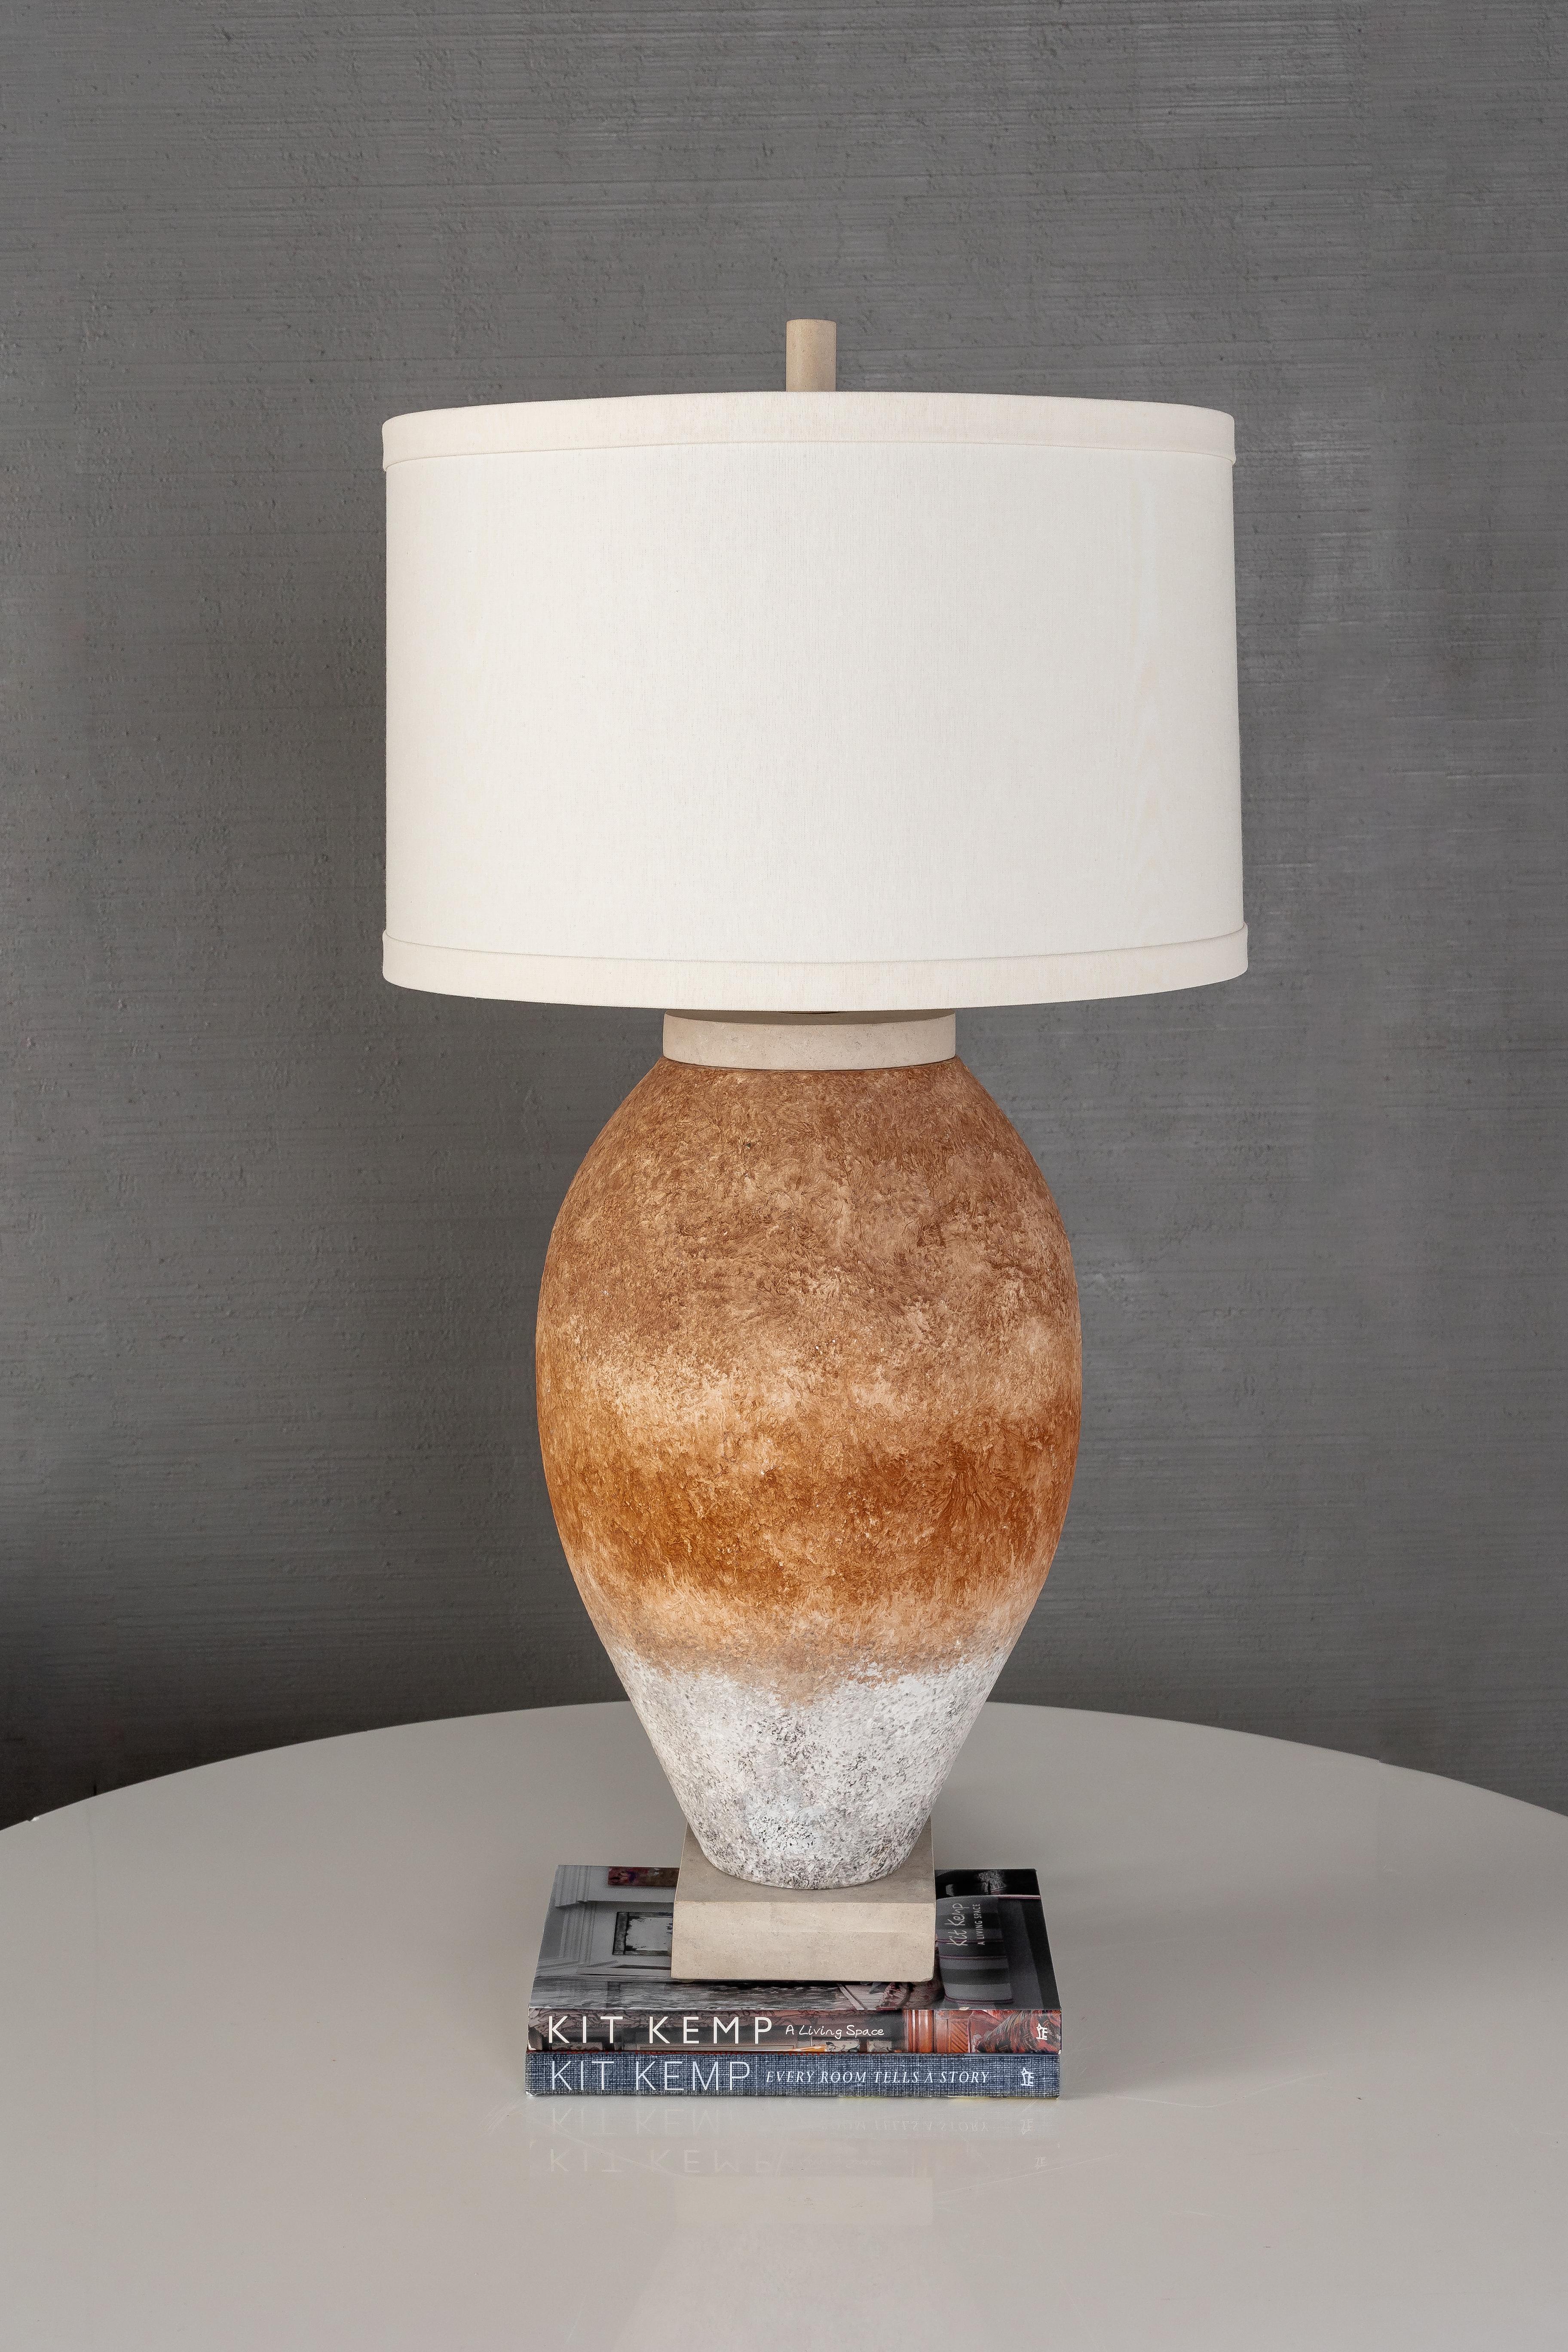 Hand-formed terracotta toned ceramic base.

Designed by Brendan Bass, Hand-Crafted in Northern Italy.

Shade: 18